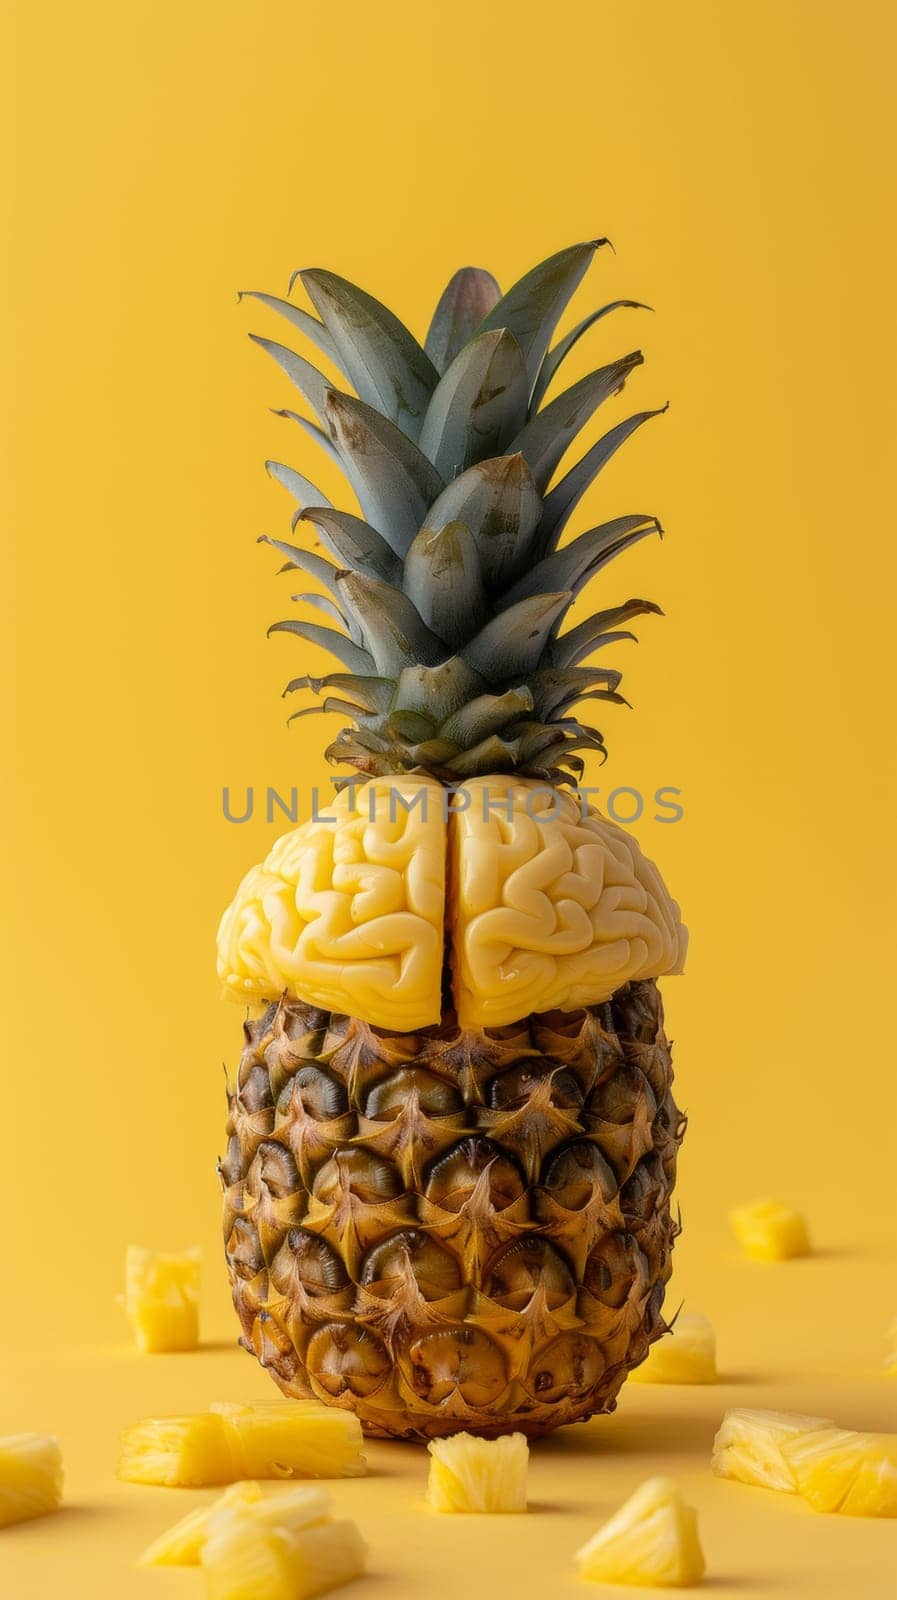 A pineapple with a brain on top of it and some pineapples